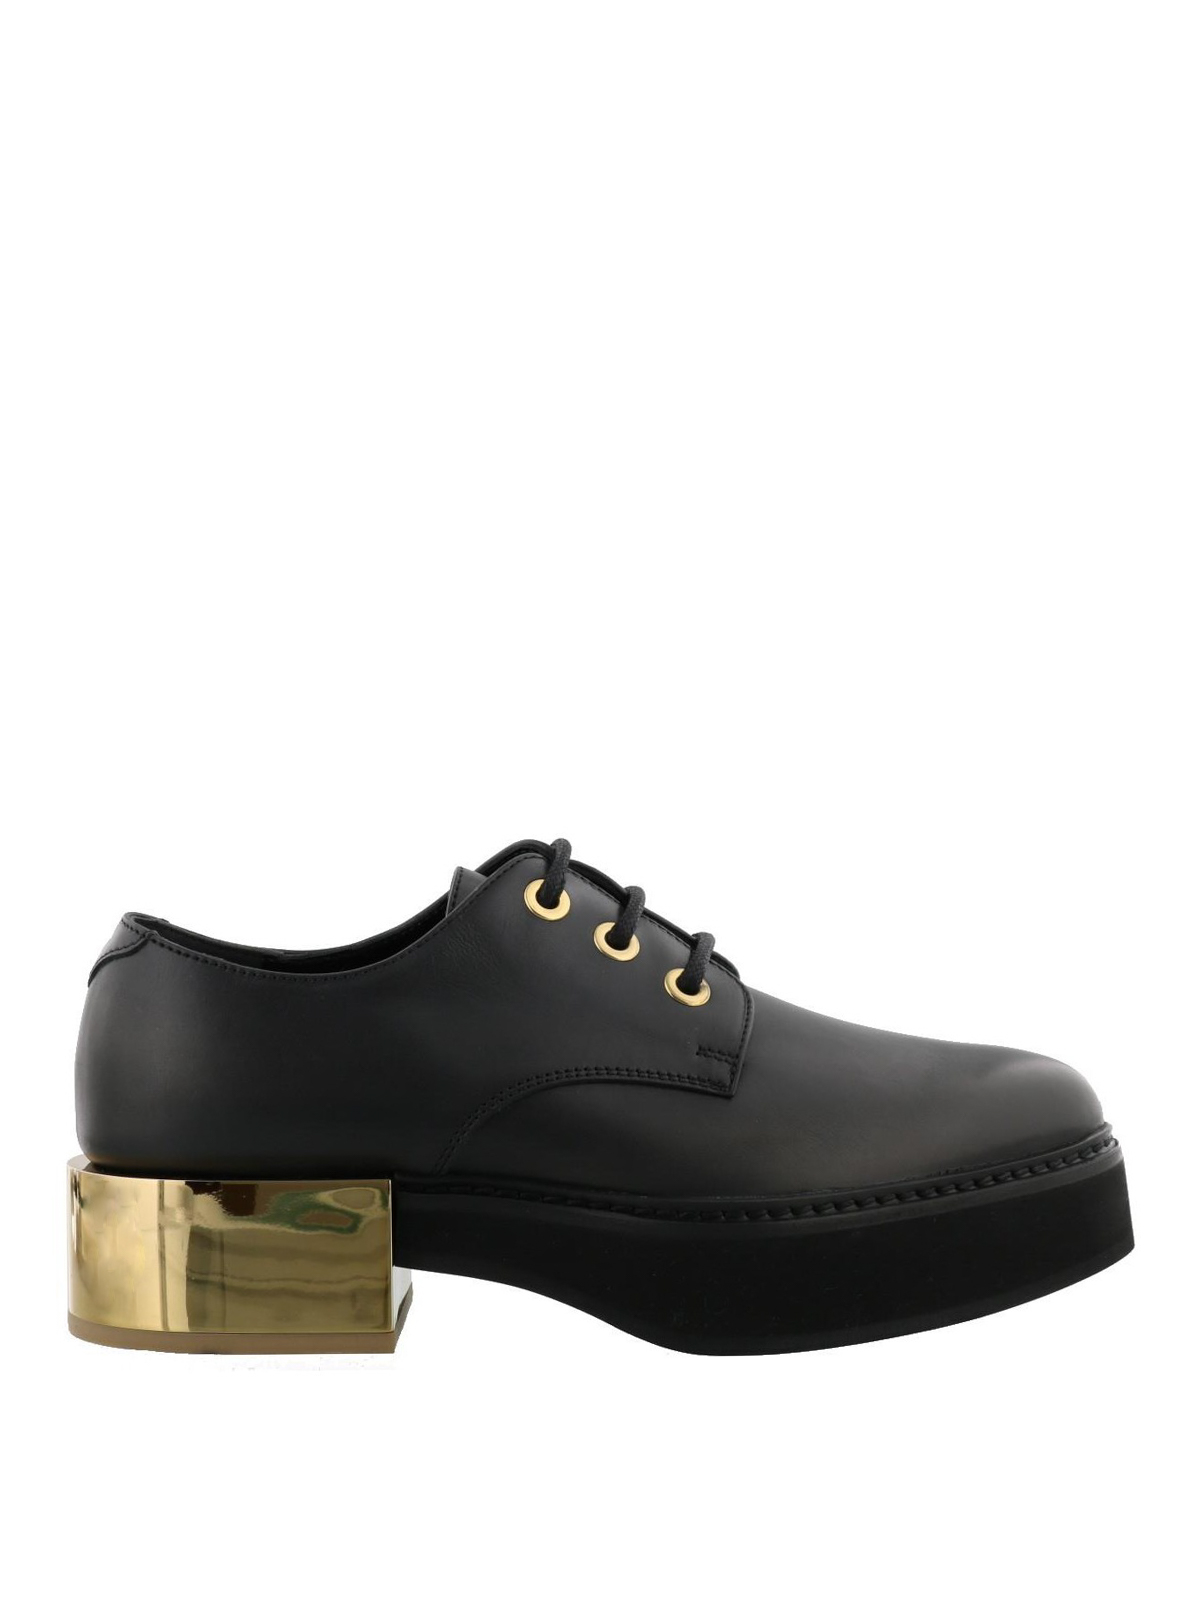 Lace-ups shoes Alexander Mcqueen - Metallic heel lace-up creepers -  509035WHR5H1085